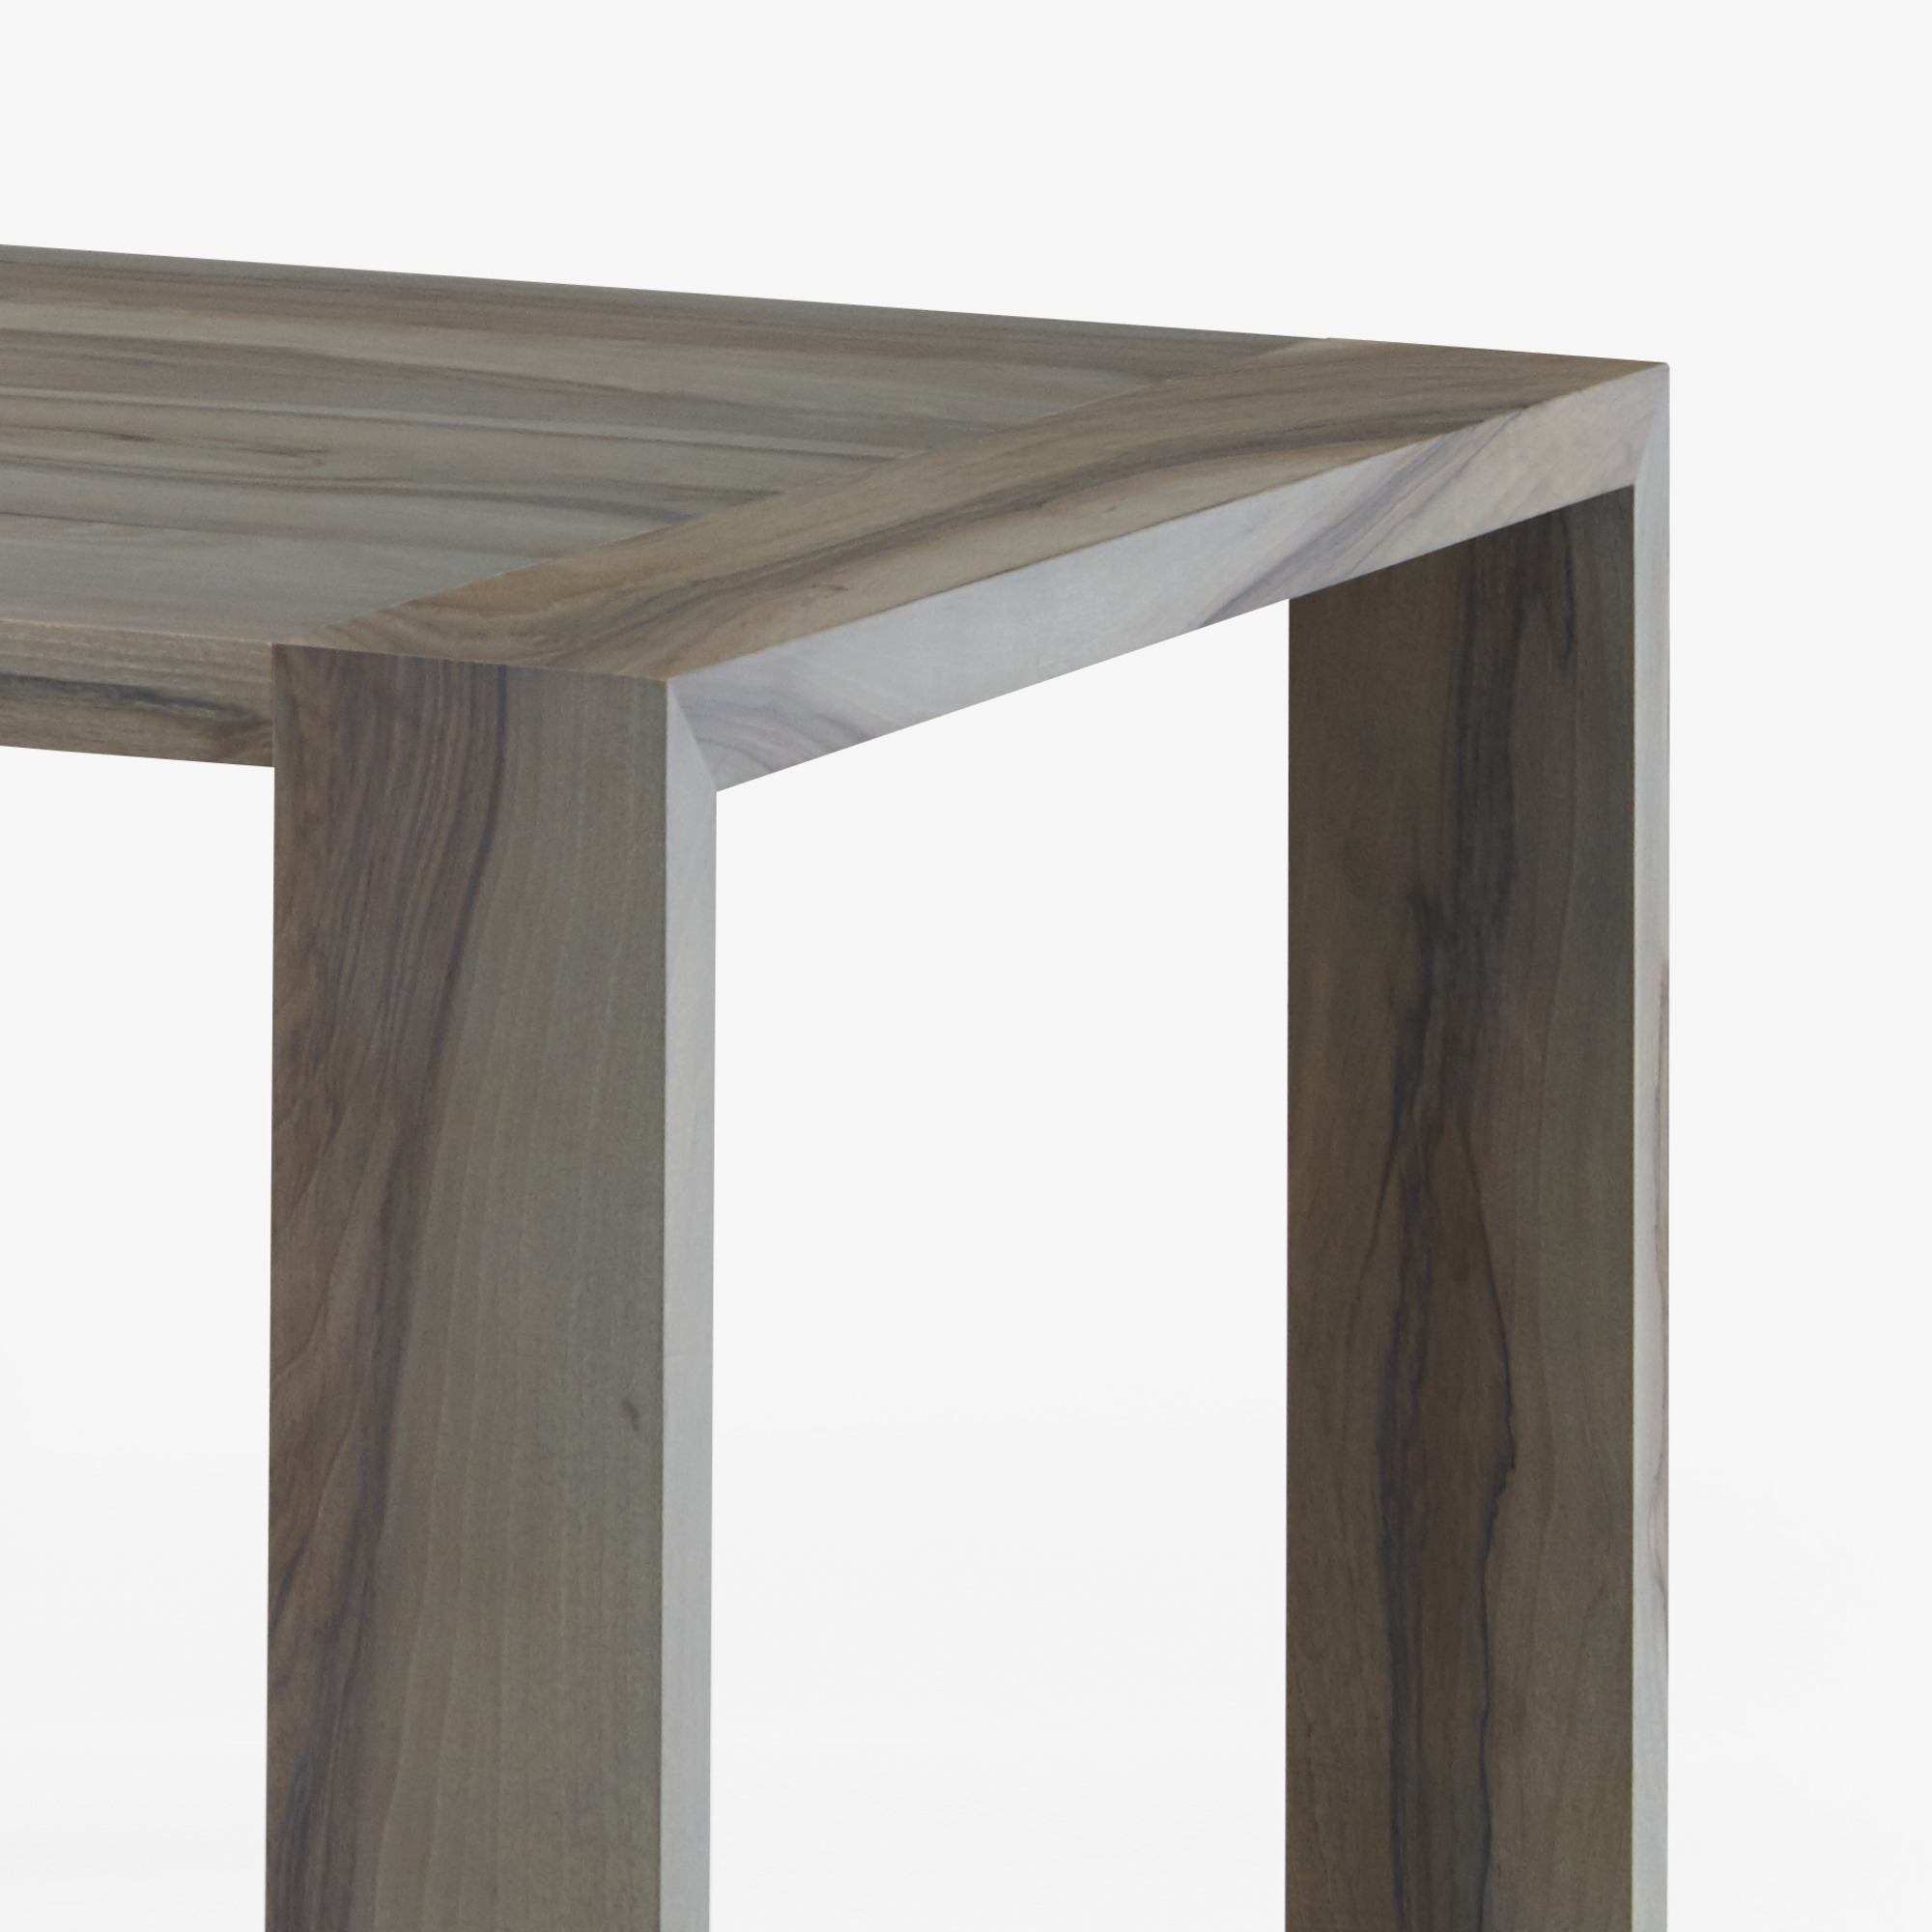 Image Dining table without extension leaf 7